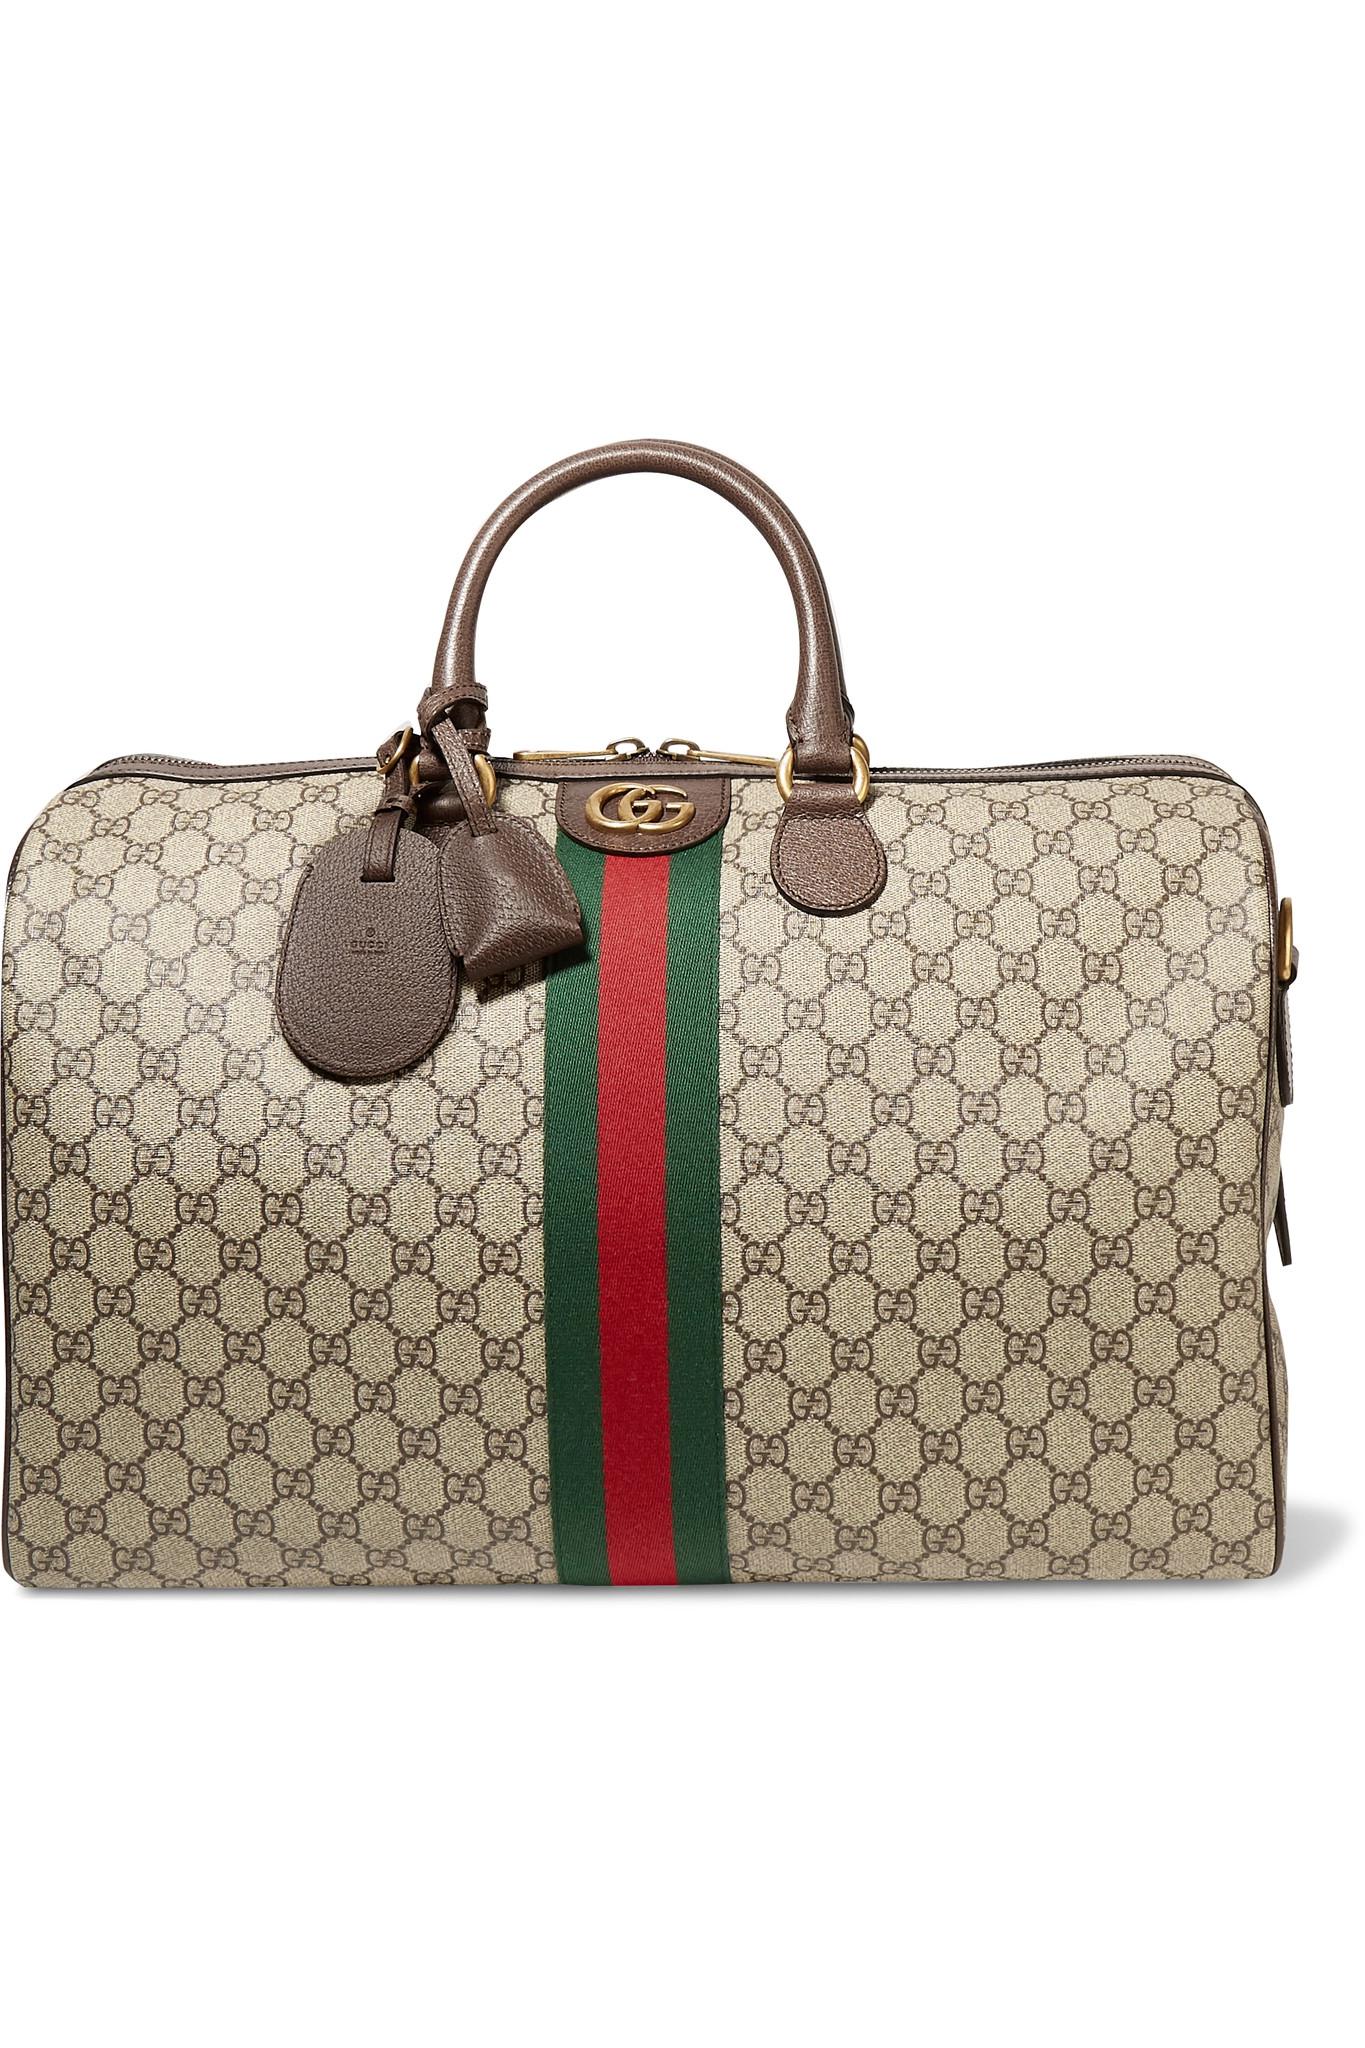 Gucci Ophidia Medium Textured Leather-trimmed Printed Coated-canvas Weekend Bag in Brown - Lyst